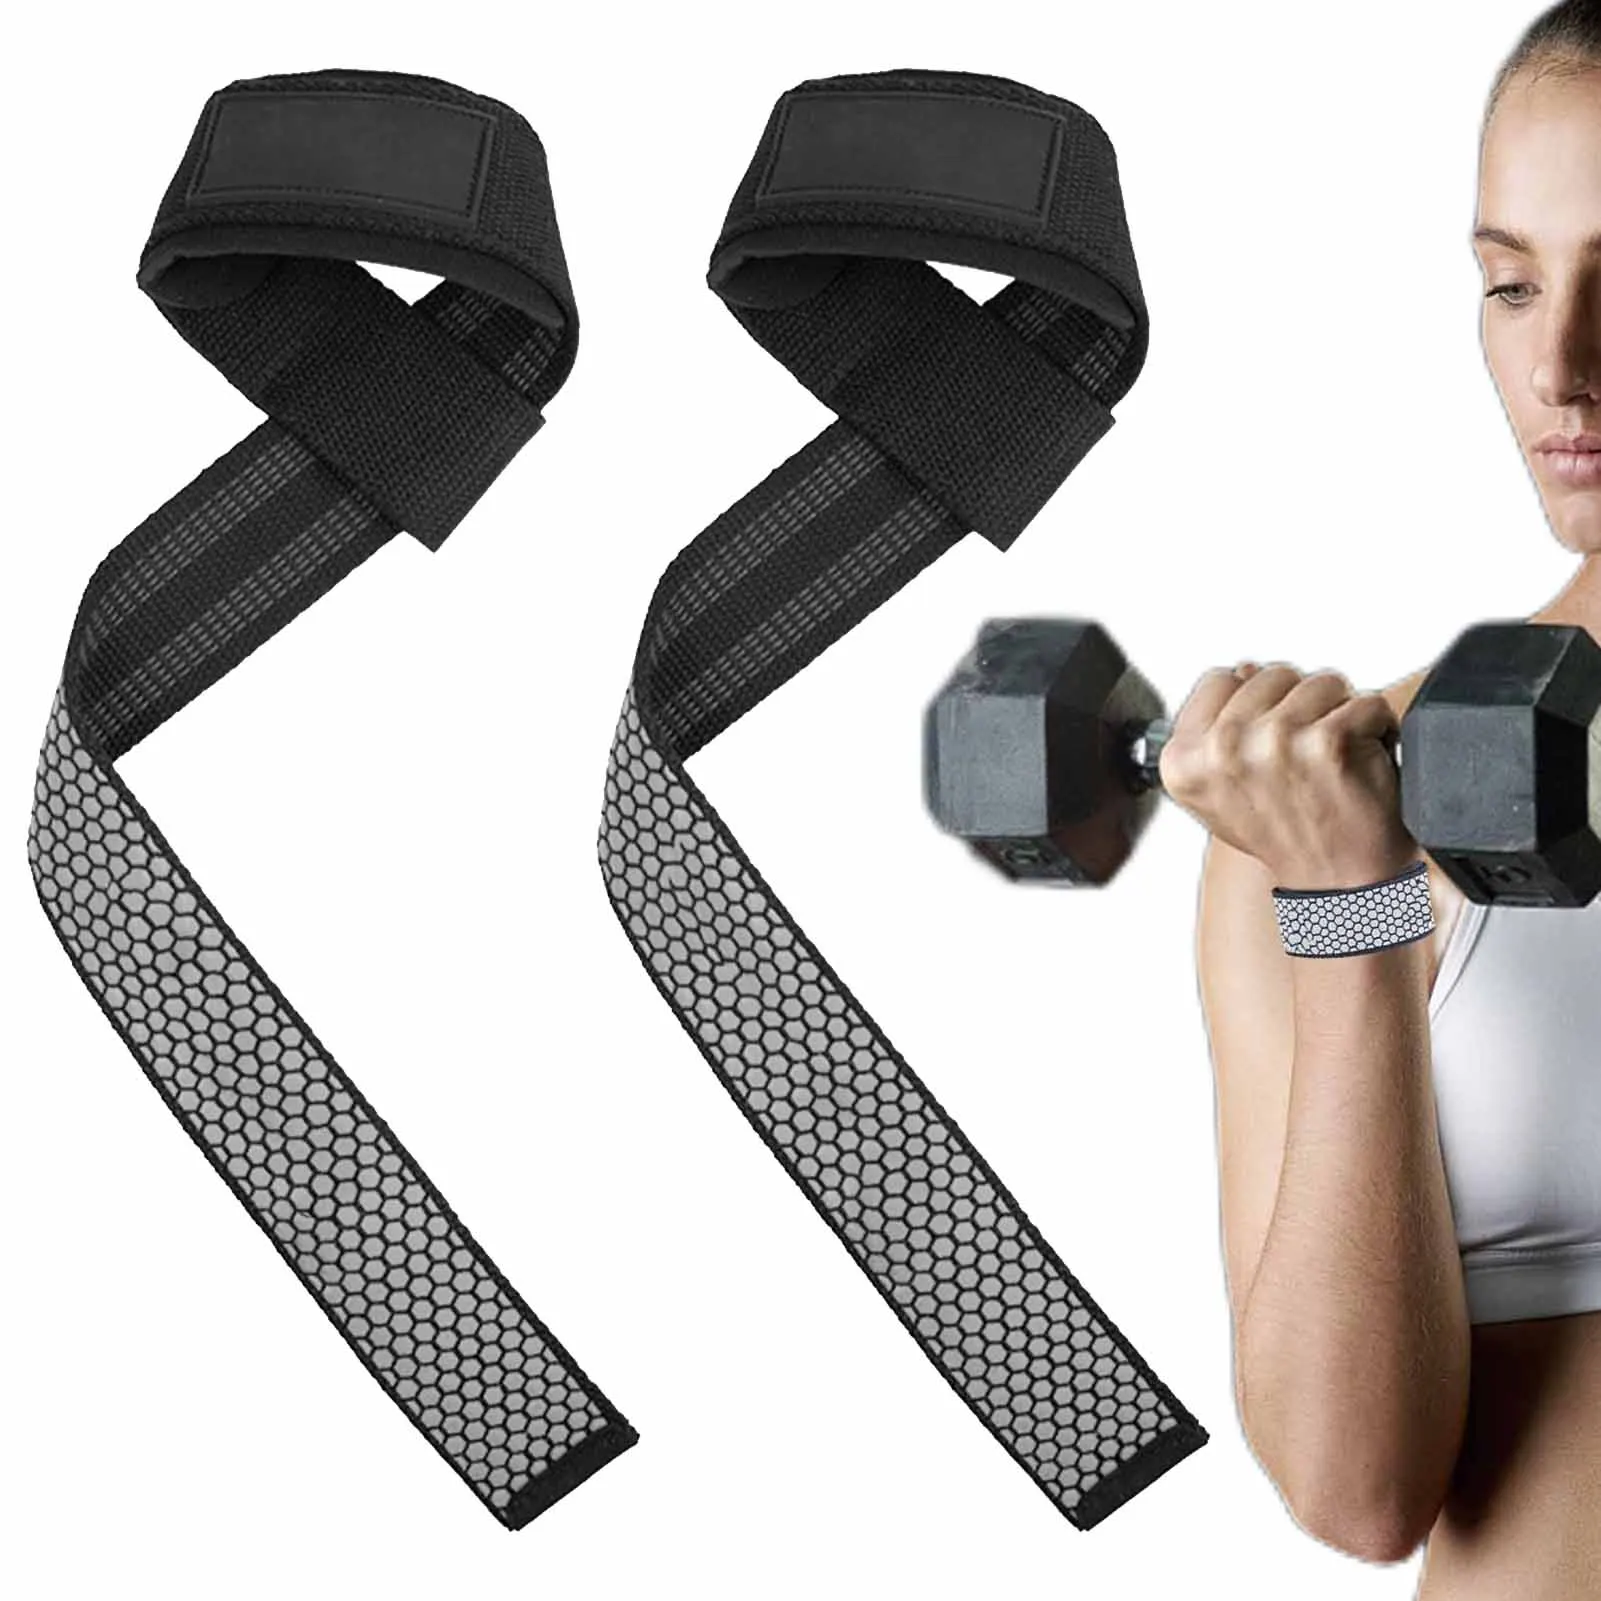 

Weight Lifting Wrist Straps | Lifting Straps for Weightlifting | Wrist Support Wraps with Buckle Design for Weightlifting Bodybu